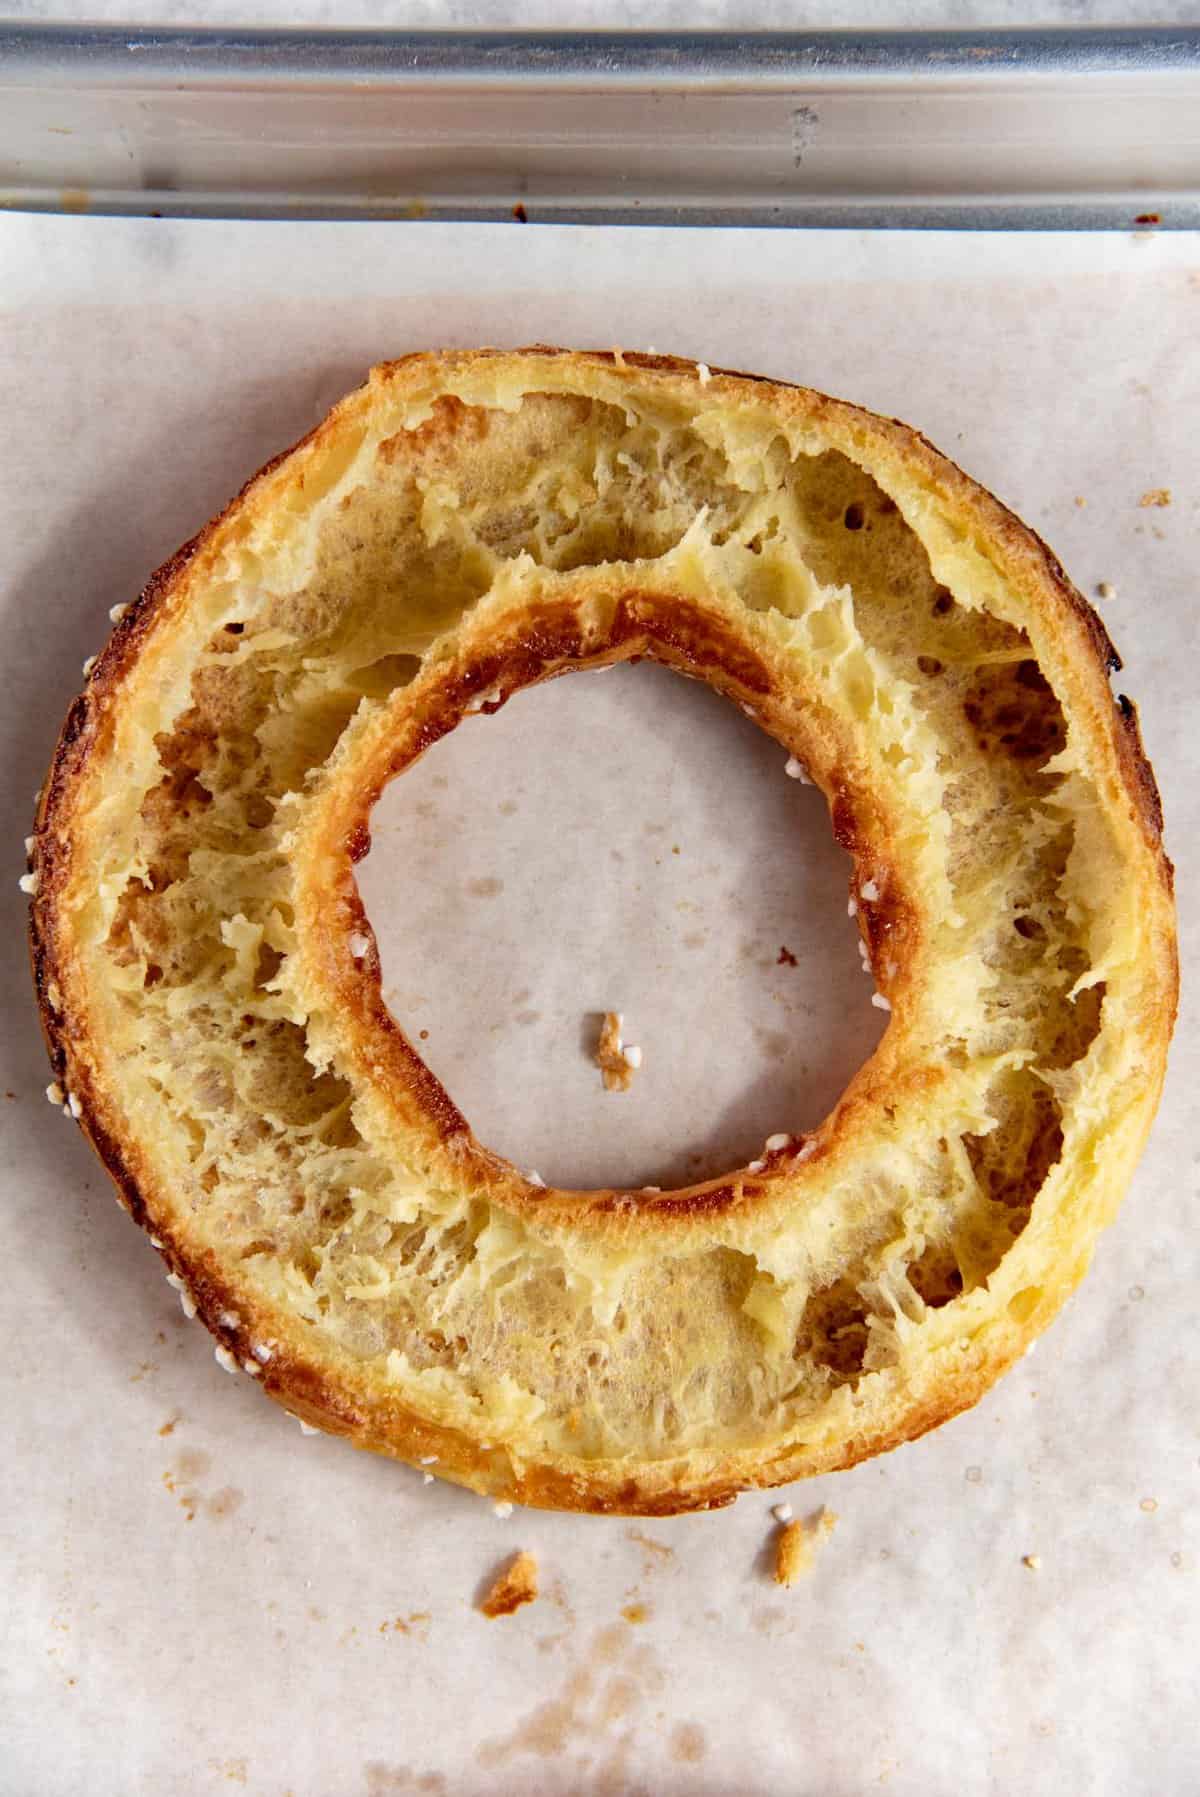 The pastry ring with the top cut off.